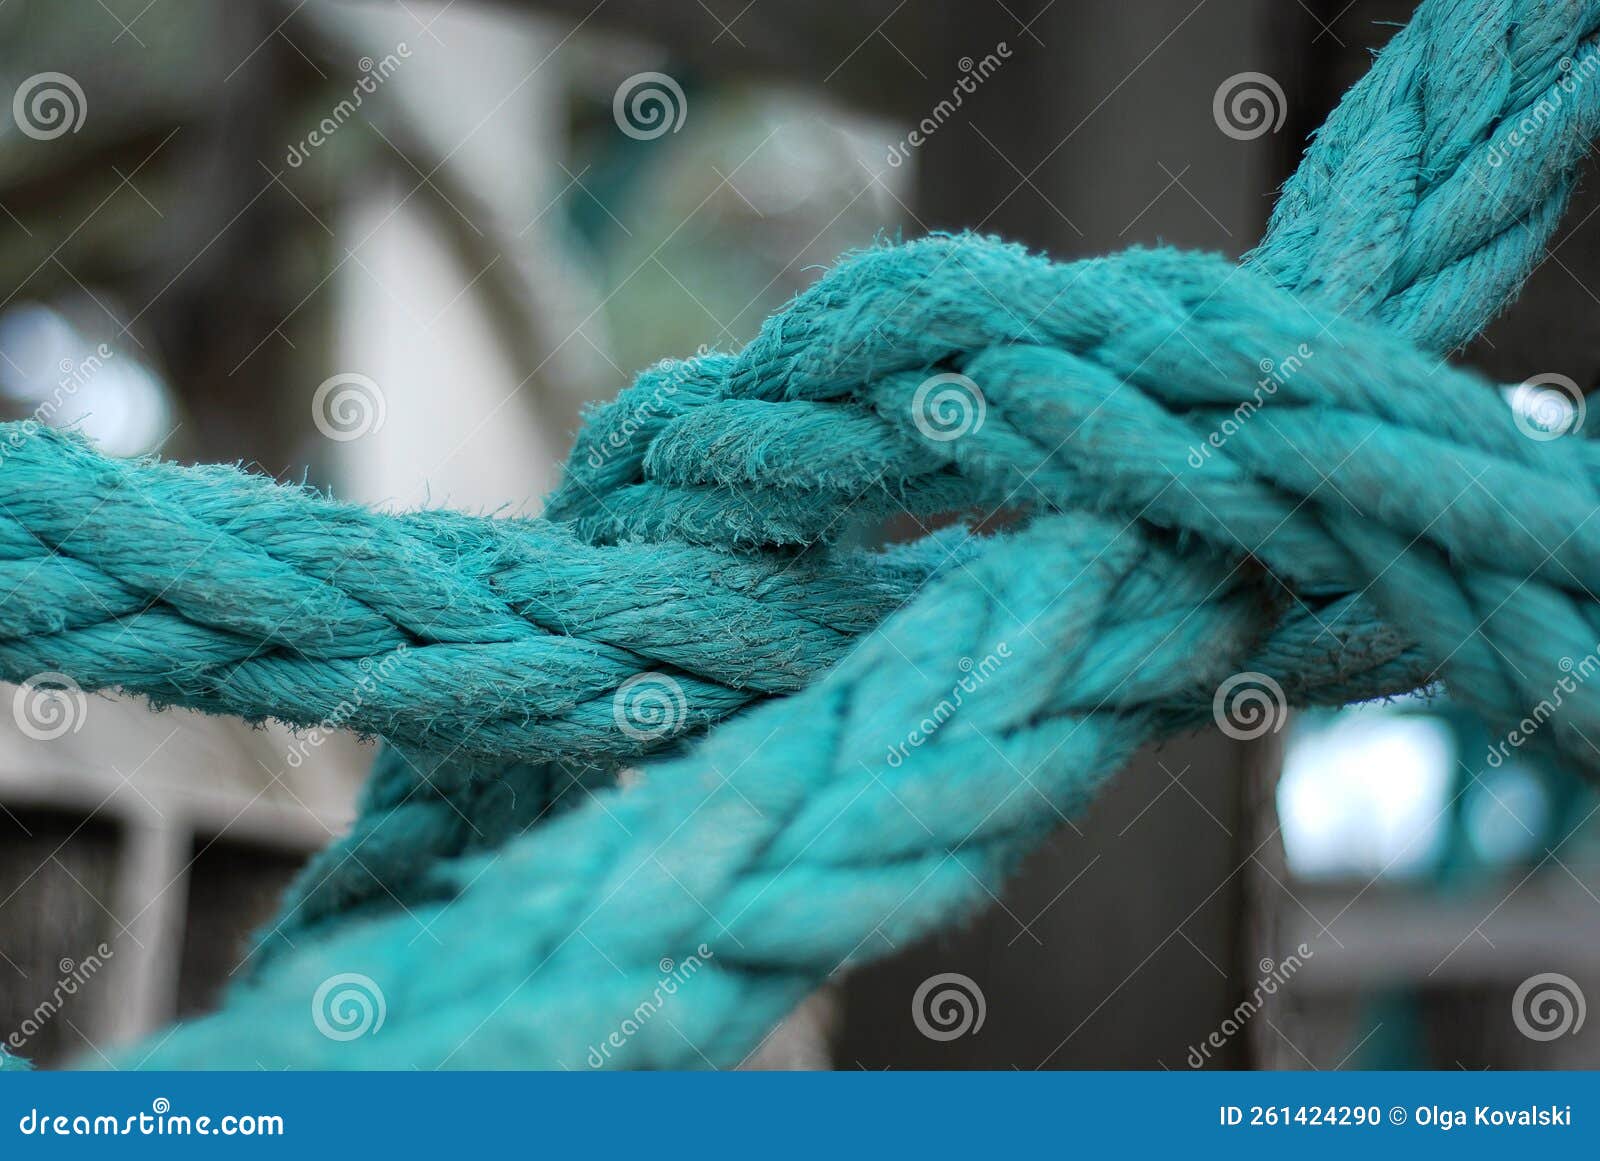 Twisted Rope. Material Texture. Weaving a Thick Rope Stock Photo